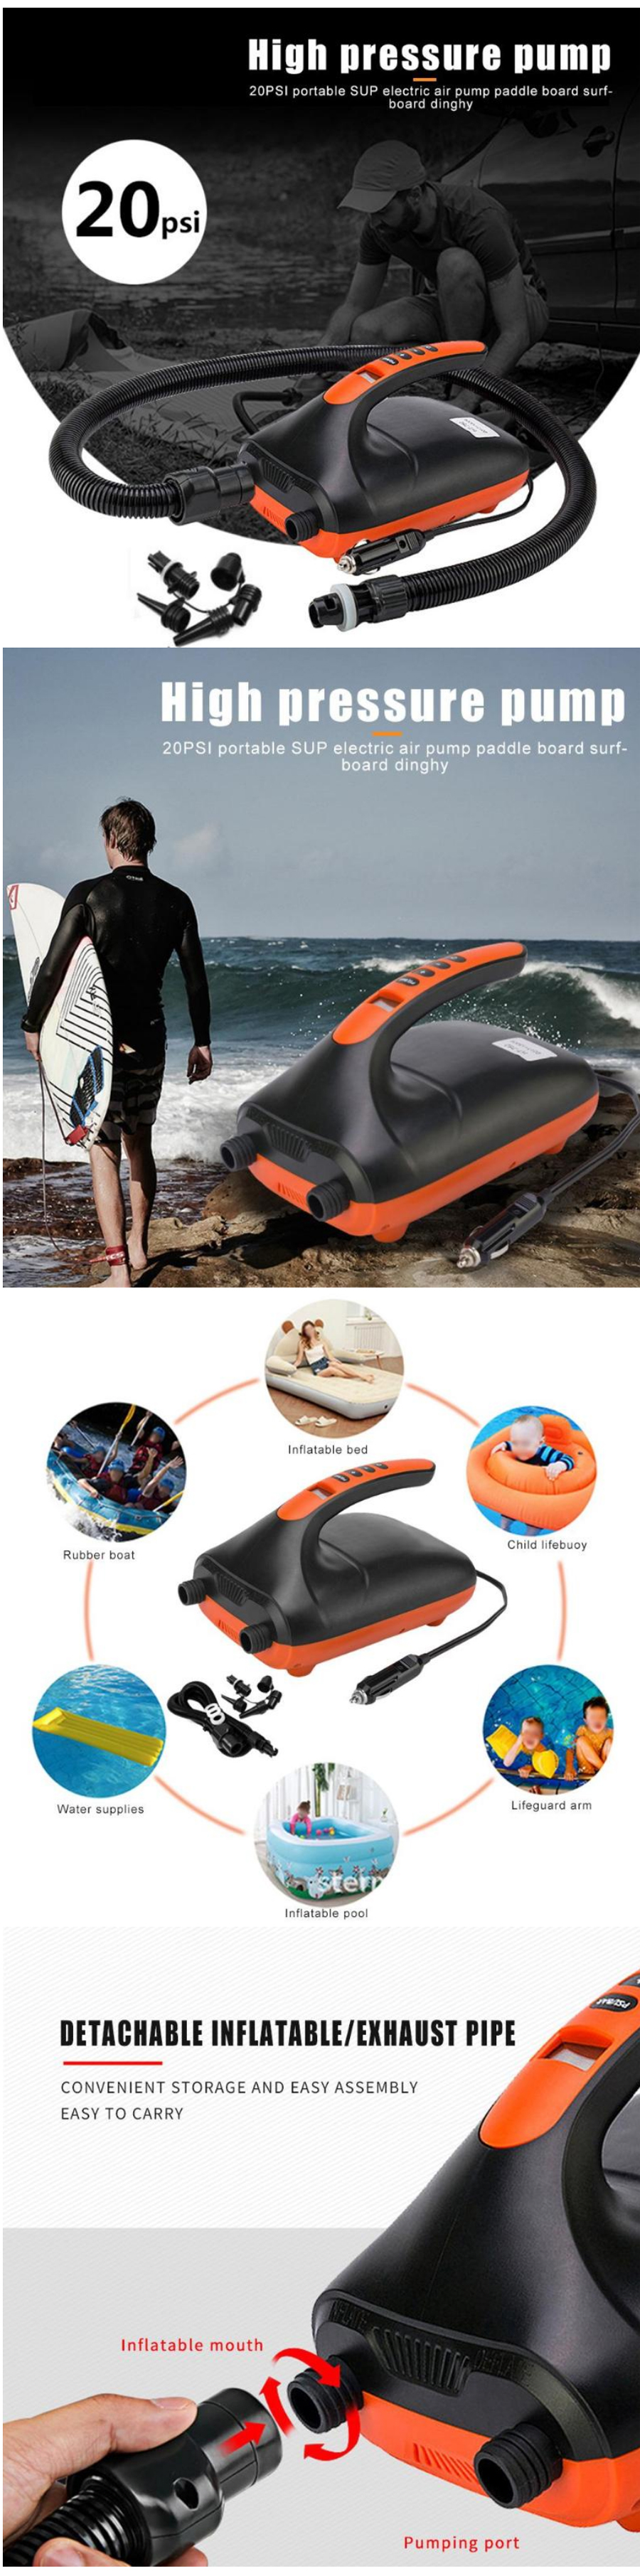 12V-20PSI-SUP-Electric-SUP-Inflatable-Air-Pump-Compressor-Lightweight-Outdoor-Water-Sports-Surfing-S-1718647-1